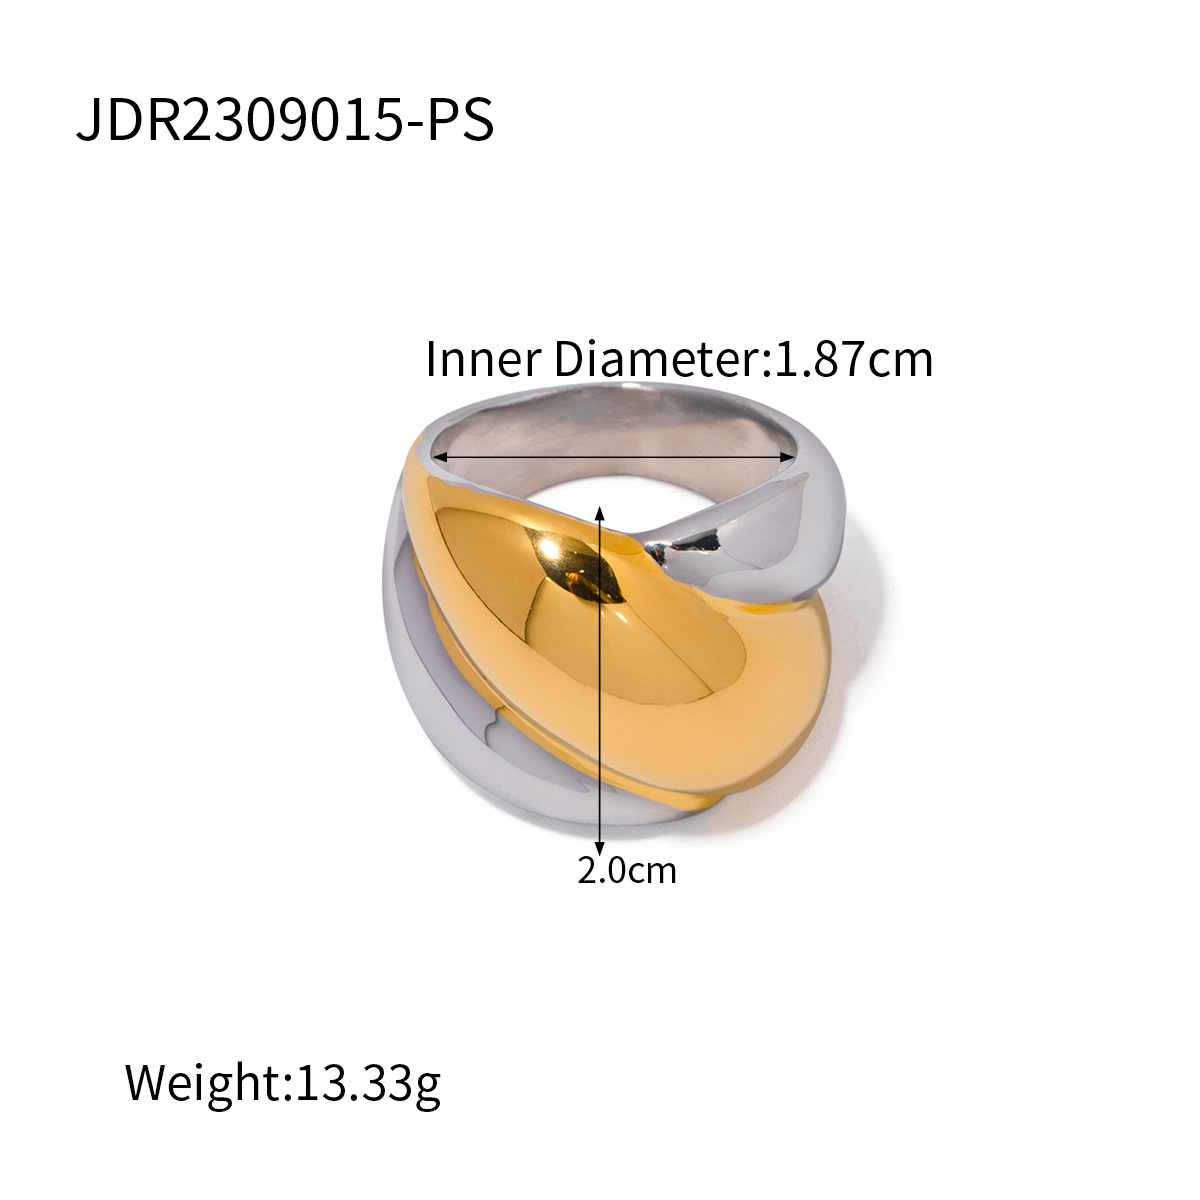 JDR2309015-PS